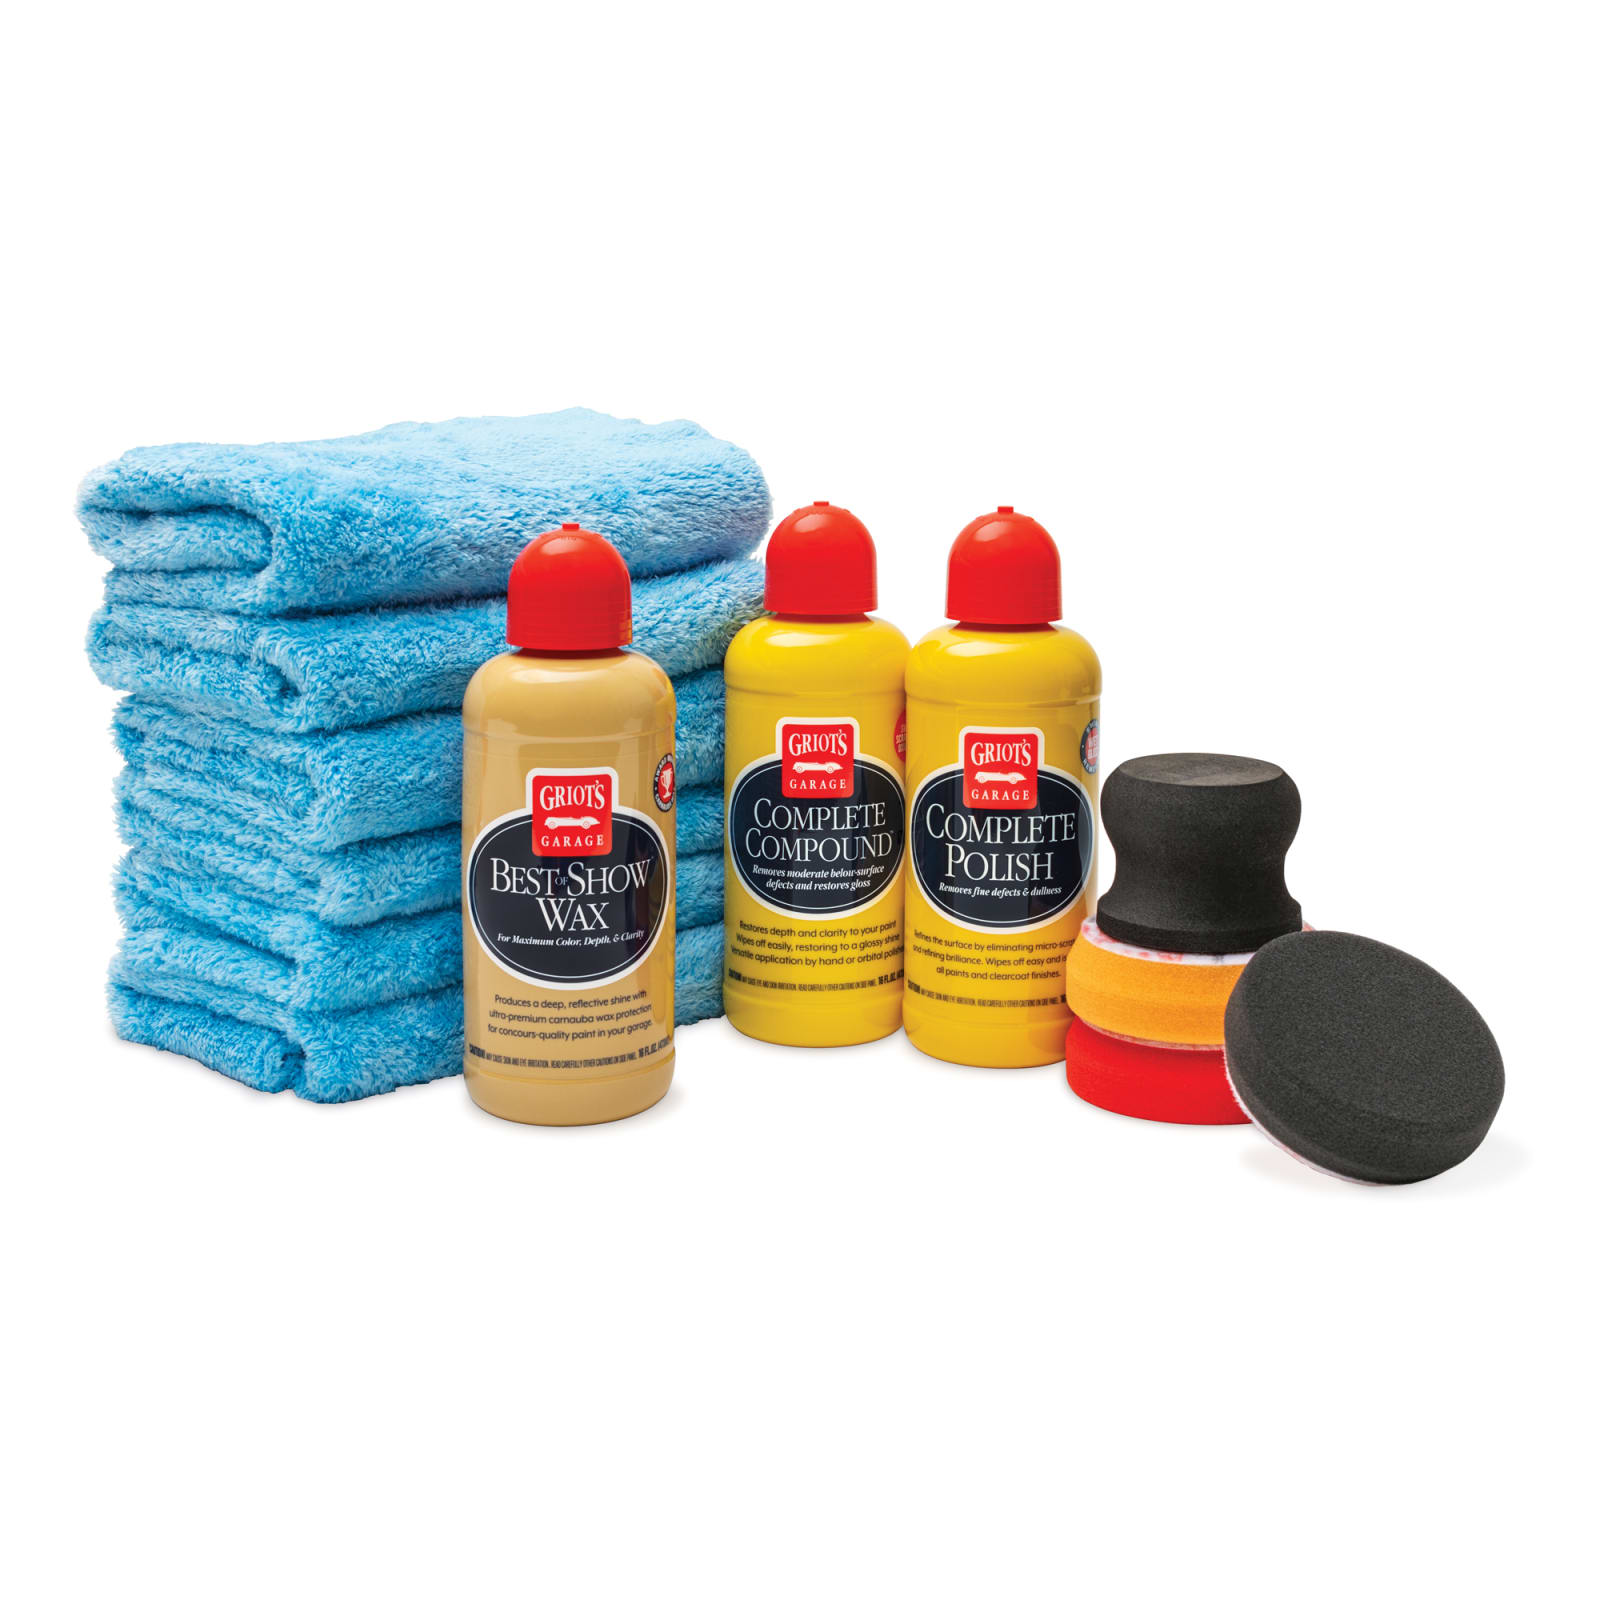 Complete Paint Clay Kit  Auto Paint Cleaning - Griot's Garage